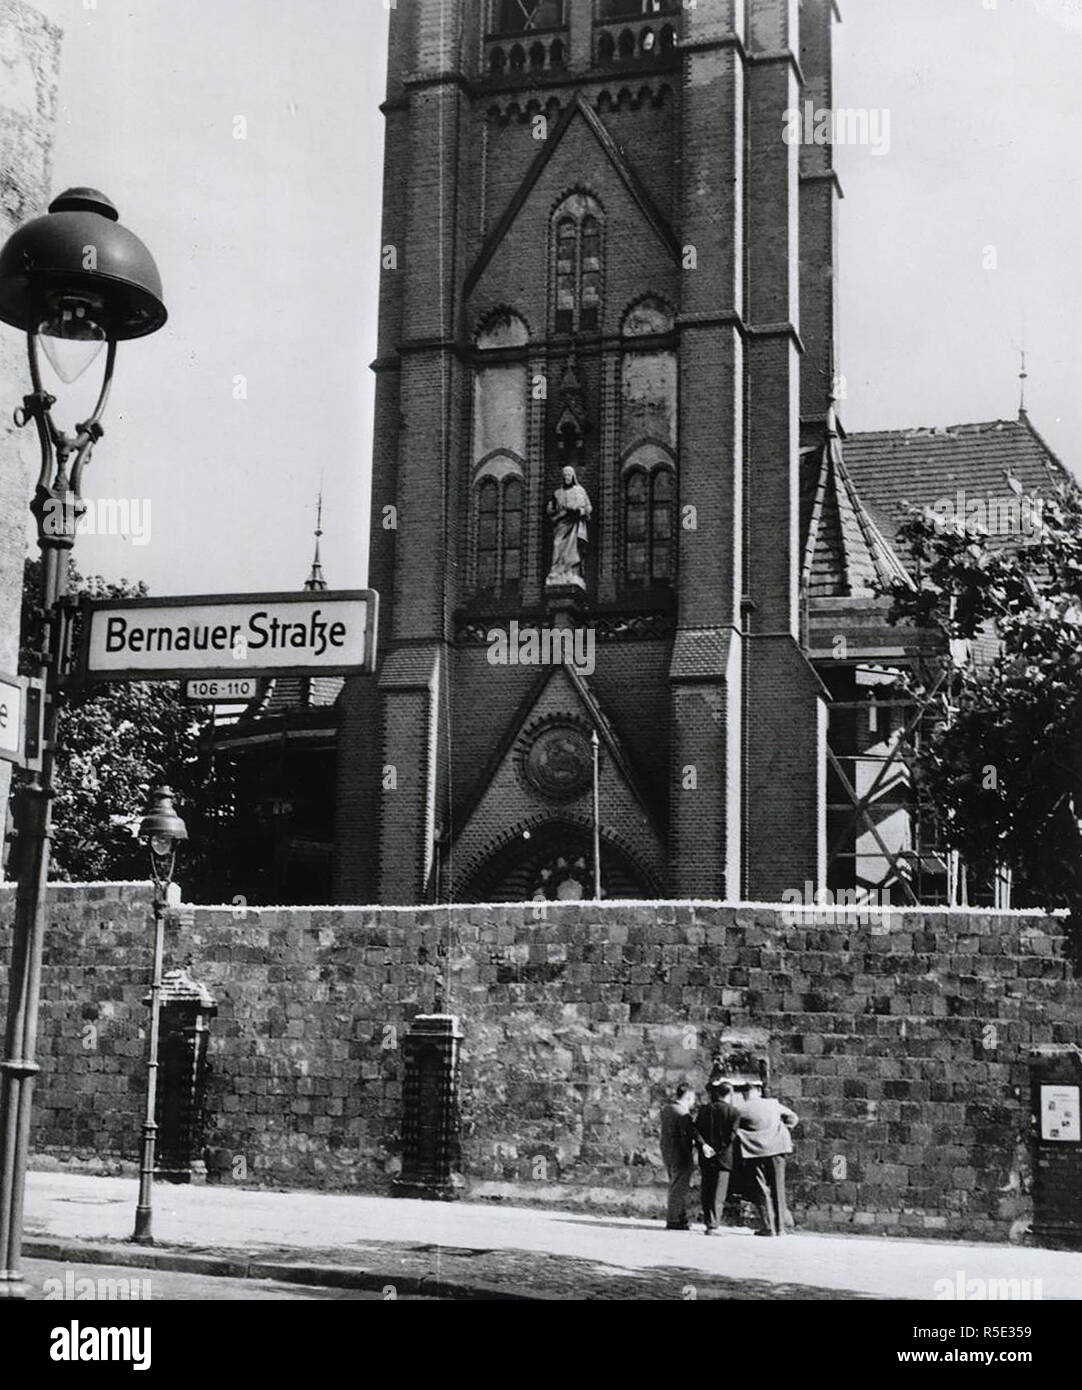 Berlin Wall along Bernauer Street blocks entrance to church in East Berlin symbolically reminding Germans of Communist opposition to religion. Stock Photo